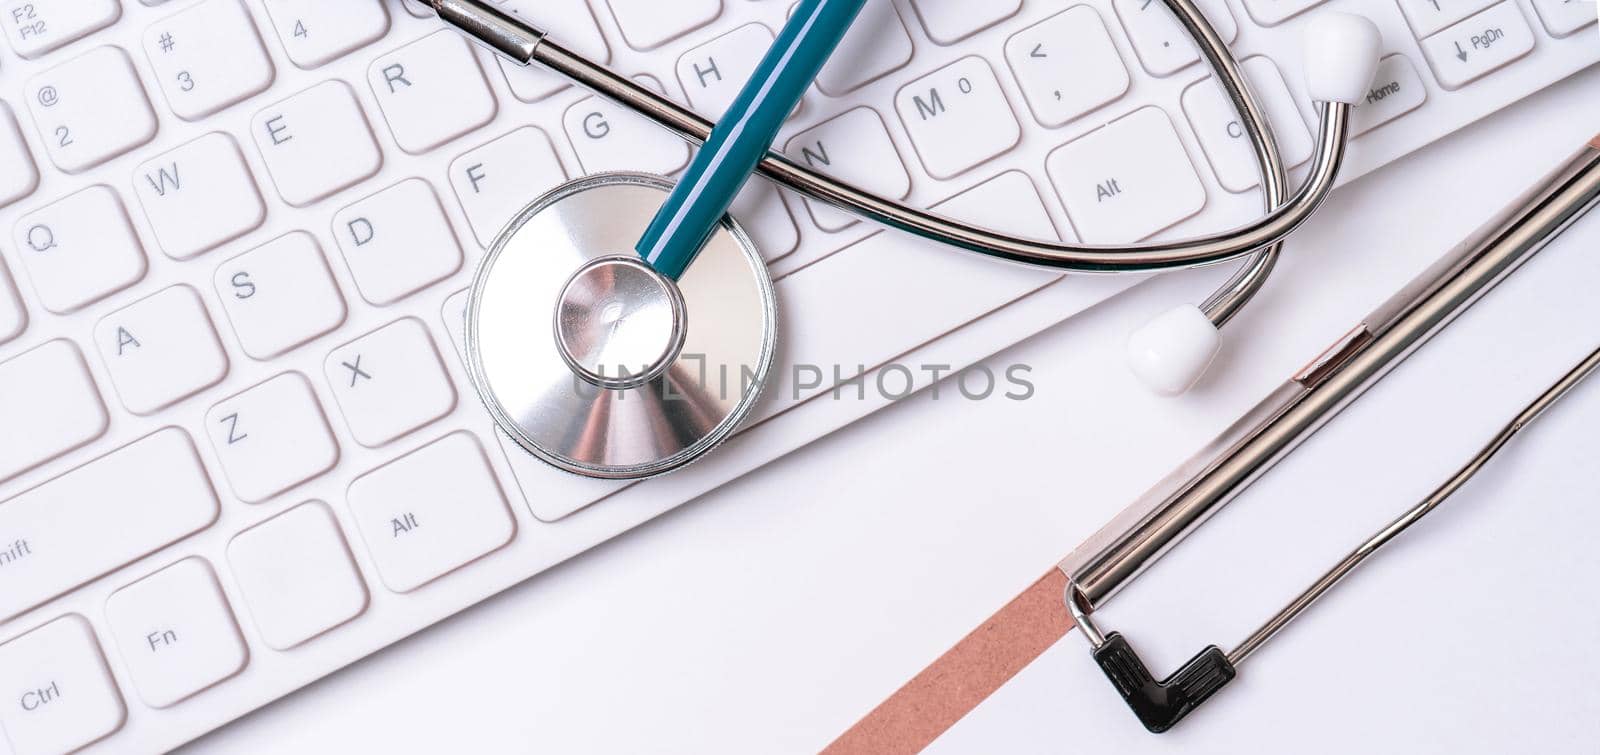 Stethoscope on keyboard on white table background. Online medical information treatment technology office concept, top view, flat lay, copy space by ROMIXIMAGE